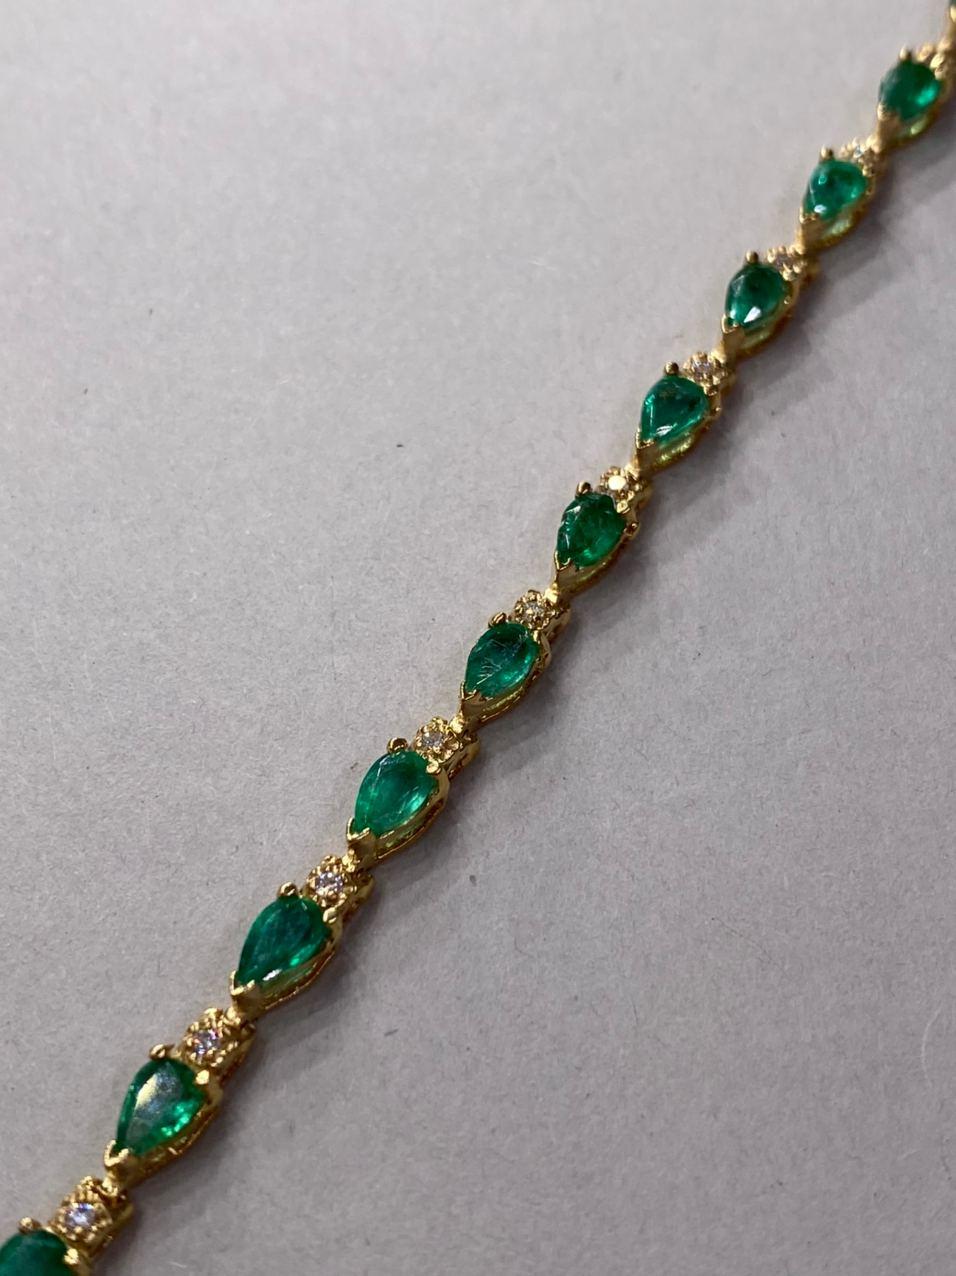 9.02 CTW Natural Emerald 18K Solid Yellow Gold Diamond Bracelet

Item Type: Bracelet

Item Style: Tennis

Item Length: 7.4 Inches

Item Width: 4.35 mm

Material: 18K Yellow Gold

Mainstone: Emerald

Stone Color: Green

Stone Weight: 8.52